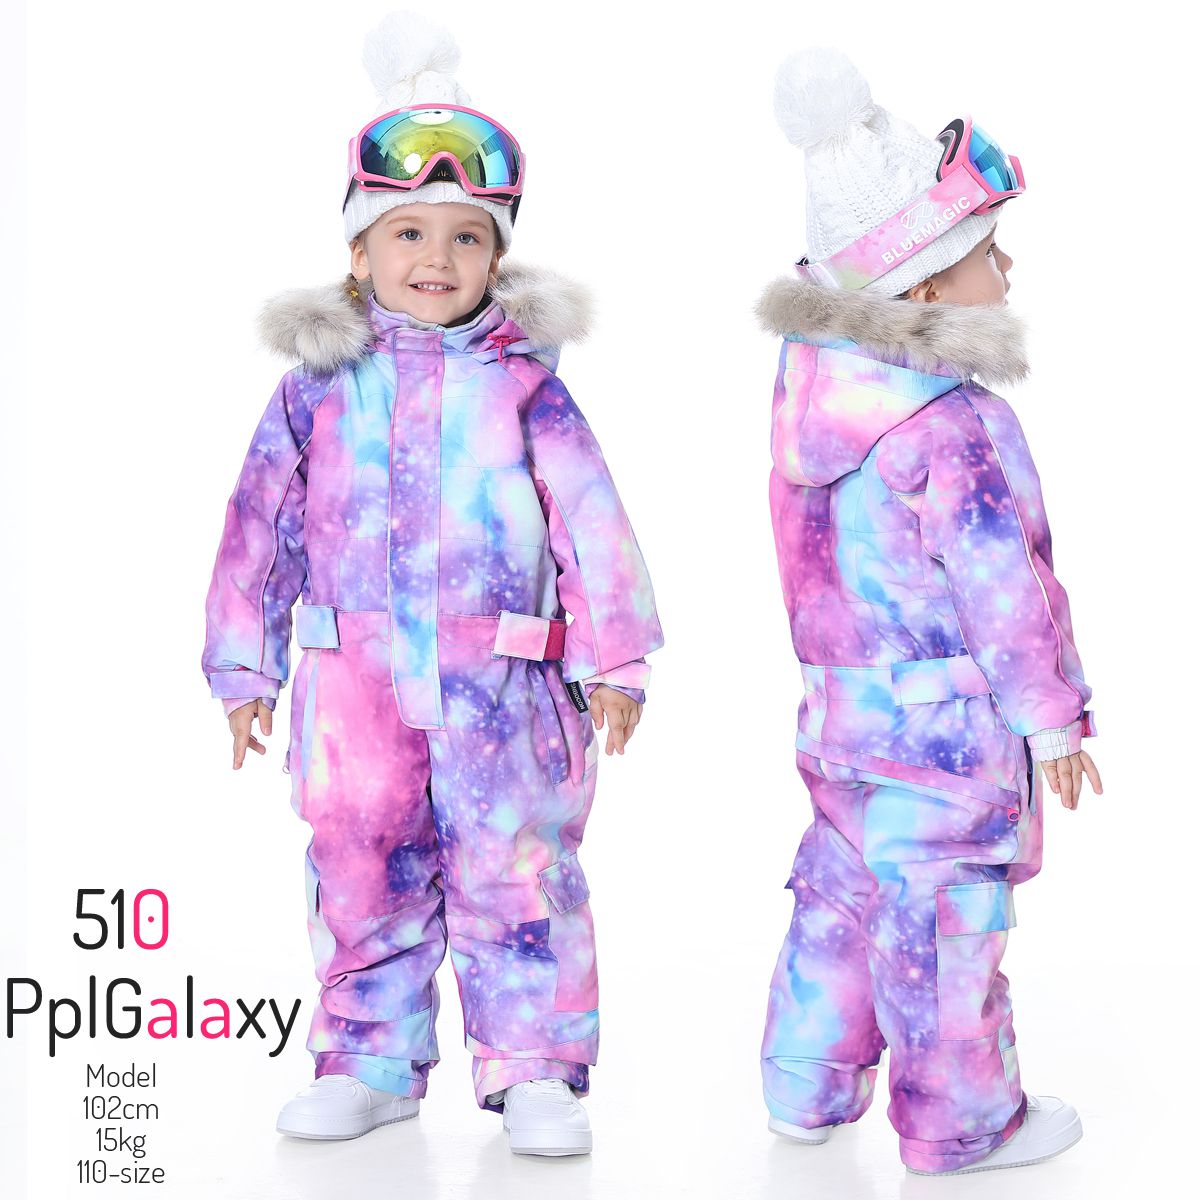  ski wear Kids coveralls Jump suit 90 100 110 120 One-piece ( sleeve, length of the legs. length adjustment is possible to do ) snowboard wear snow wear snow play 